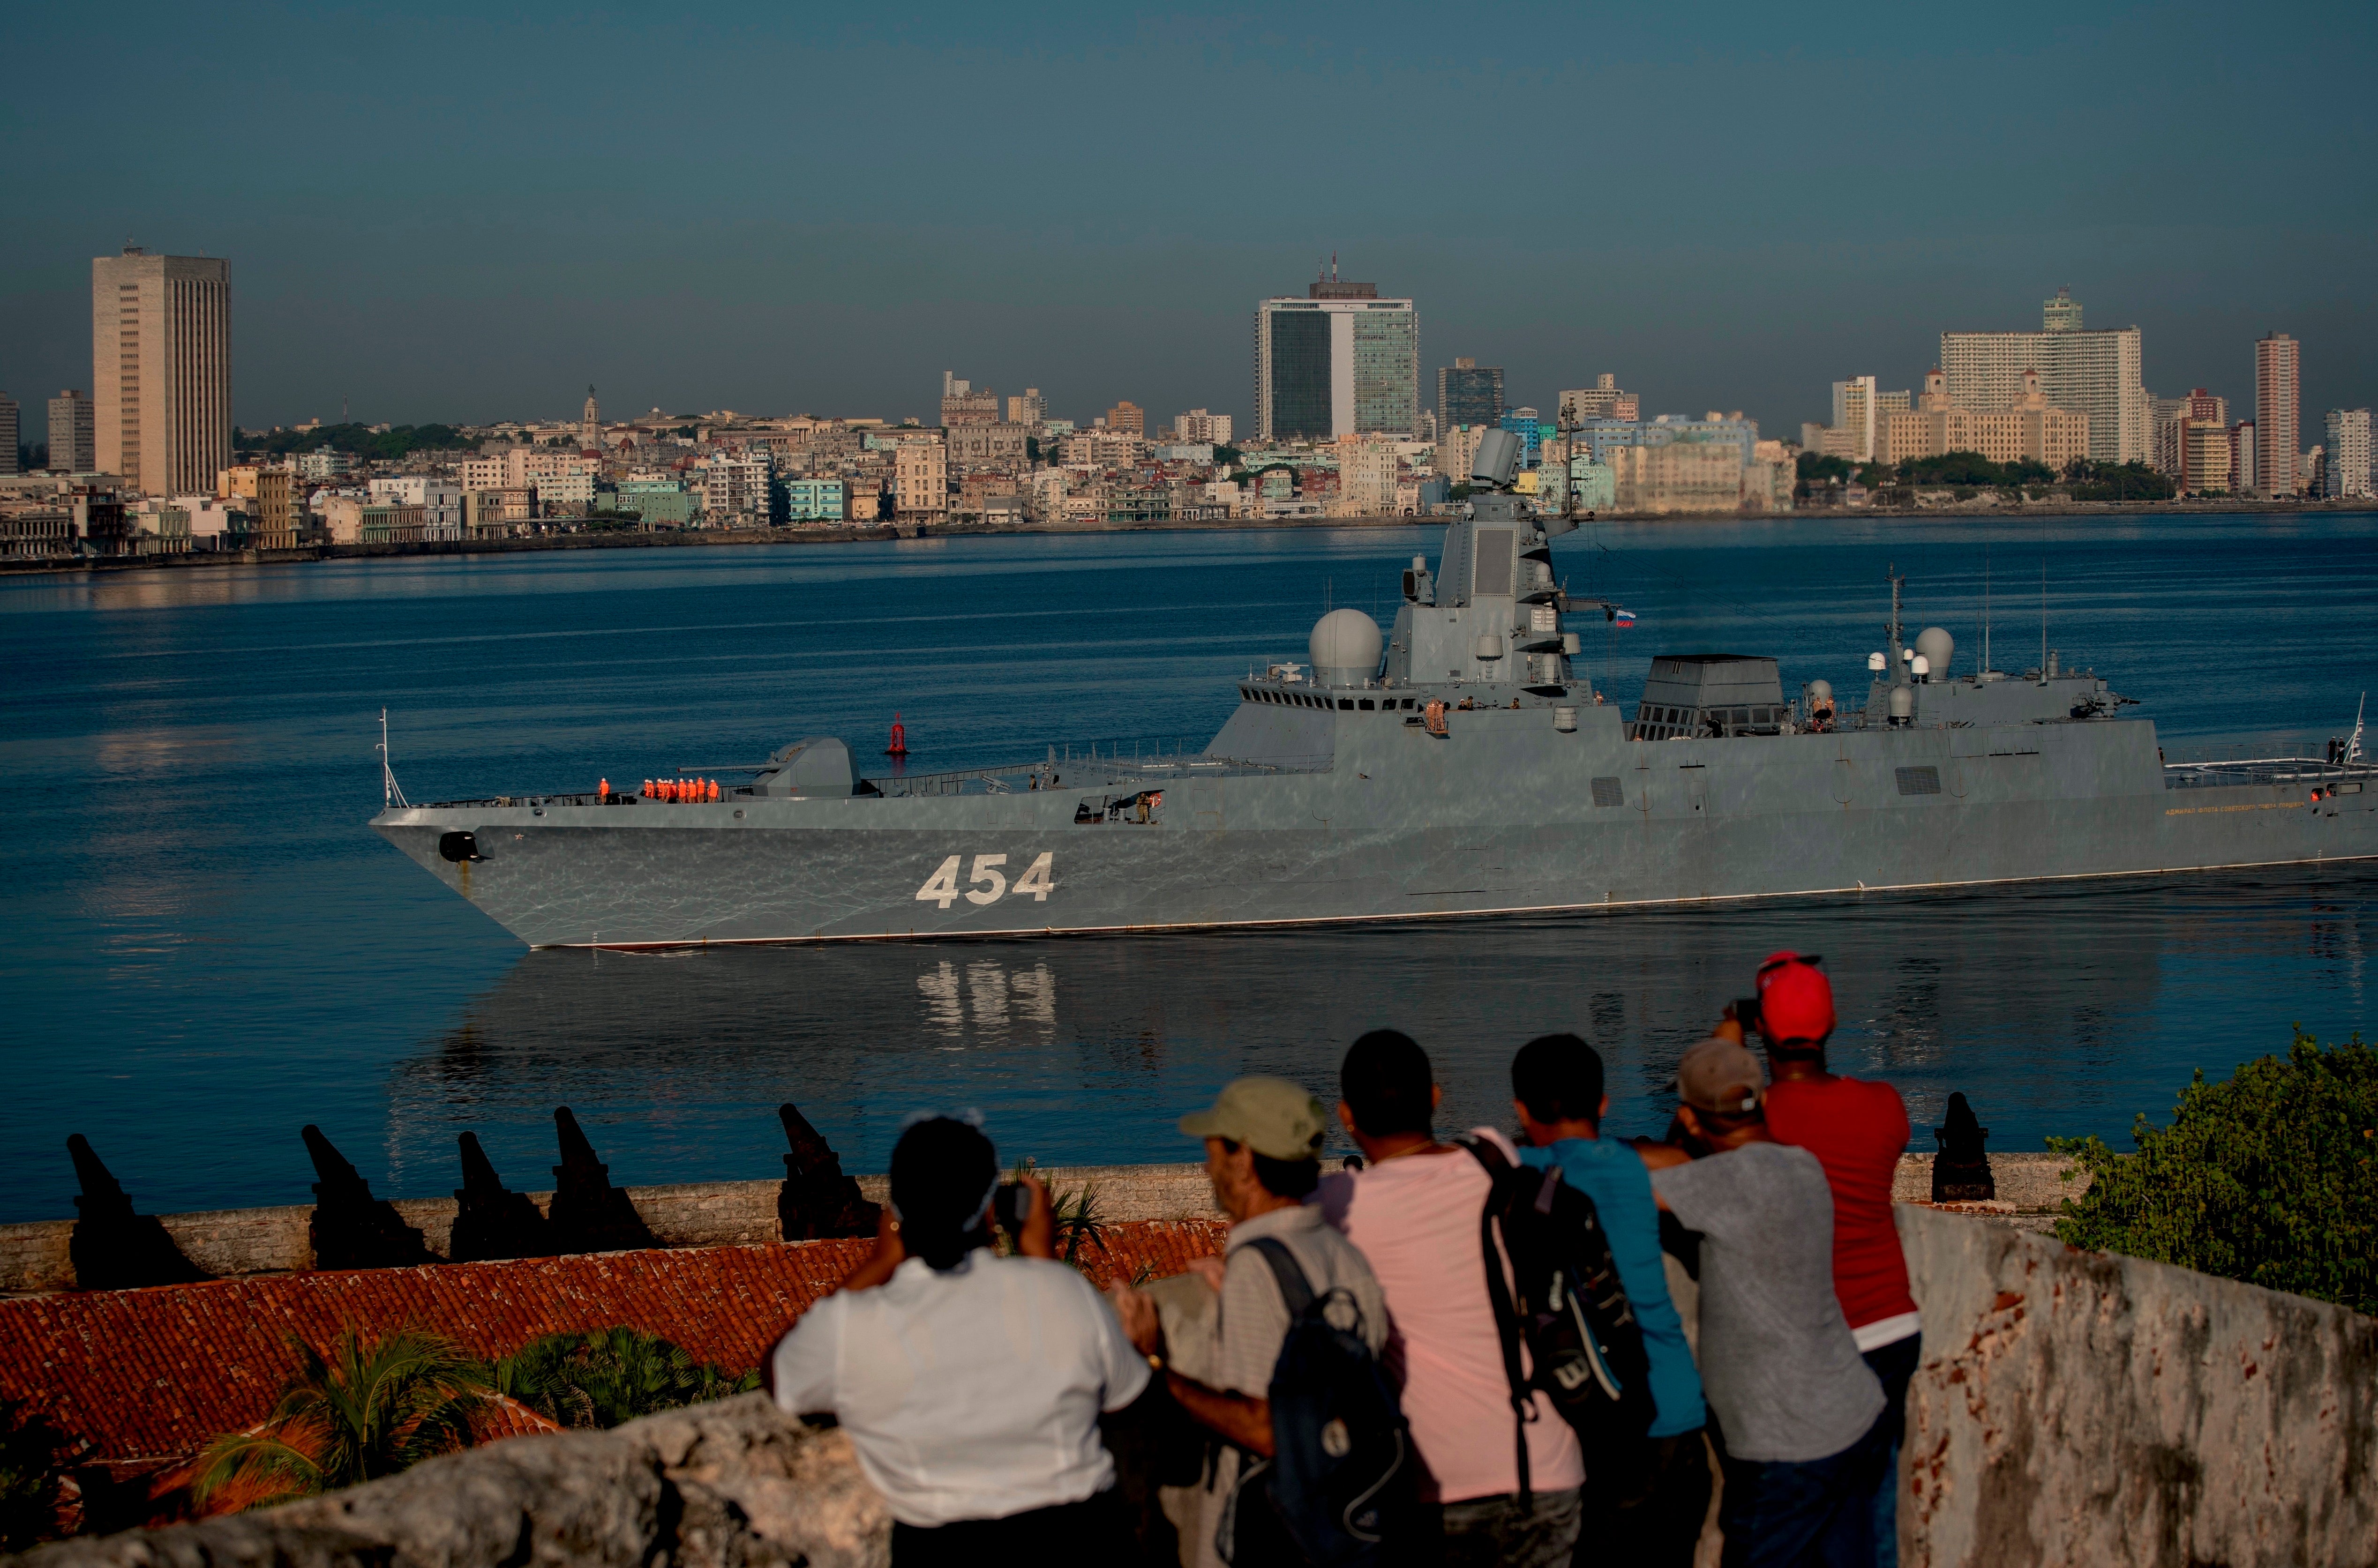 Russian Navy Admiral Gorshkov arrives in Havana, Cuba, in 2019. It can be equipped with Zircon hypersonic missiles, which the Kremlin claims are nuclear-capable